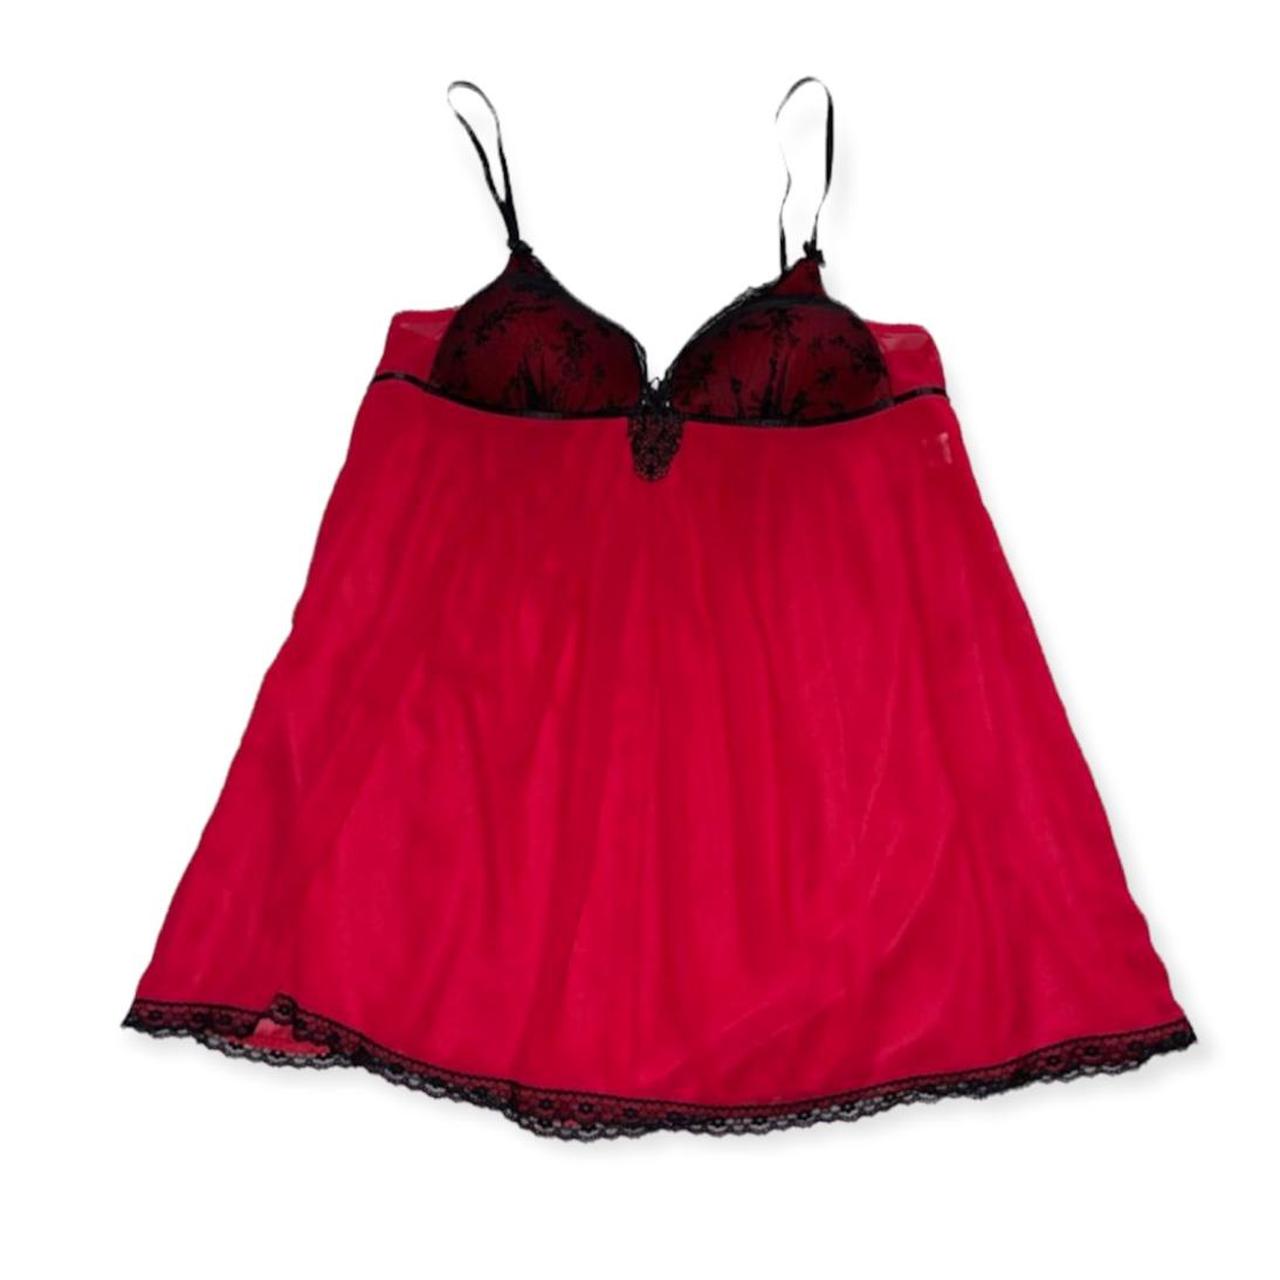 Product Image 2 - Red Sheer Babydoll Top

Vintage 90s
Size